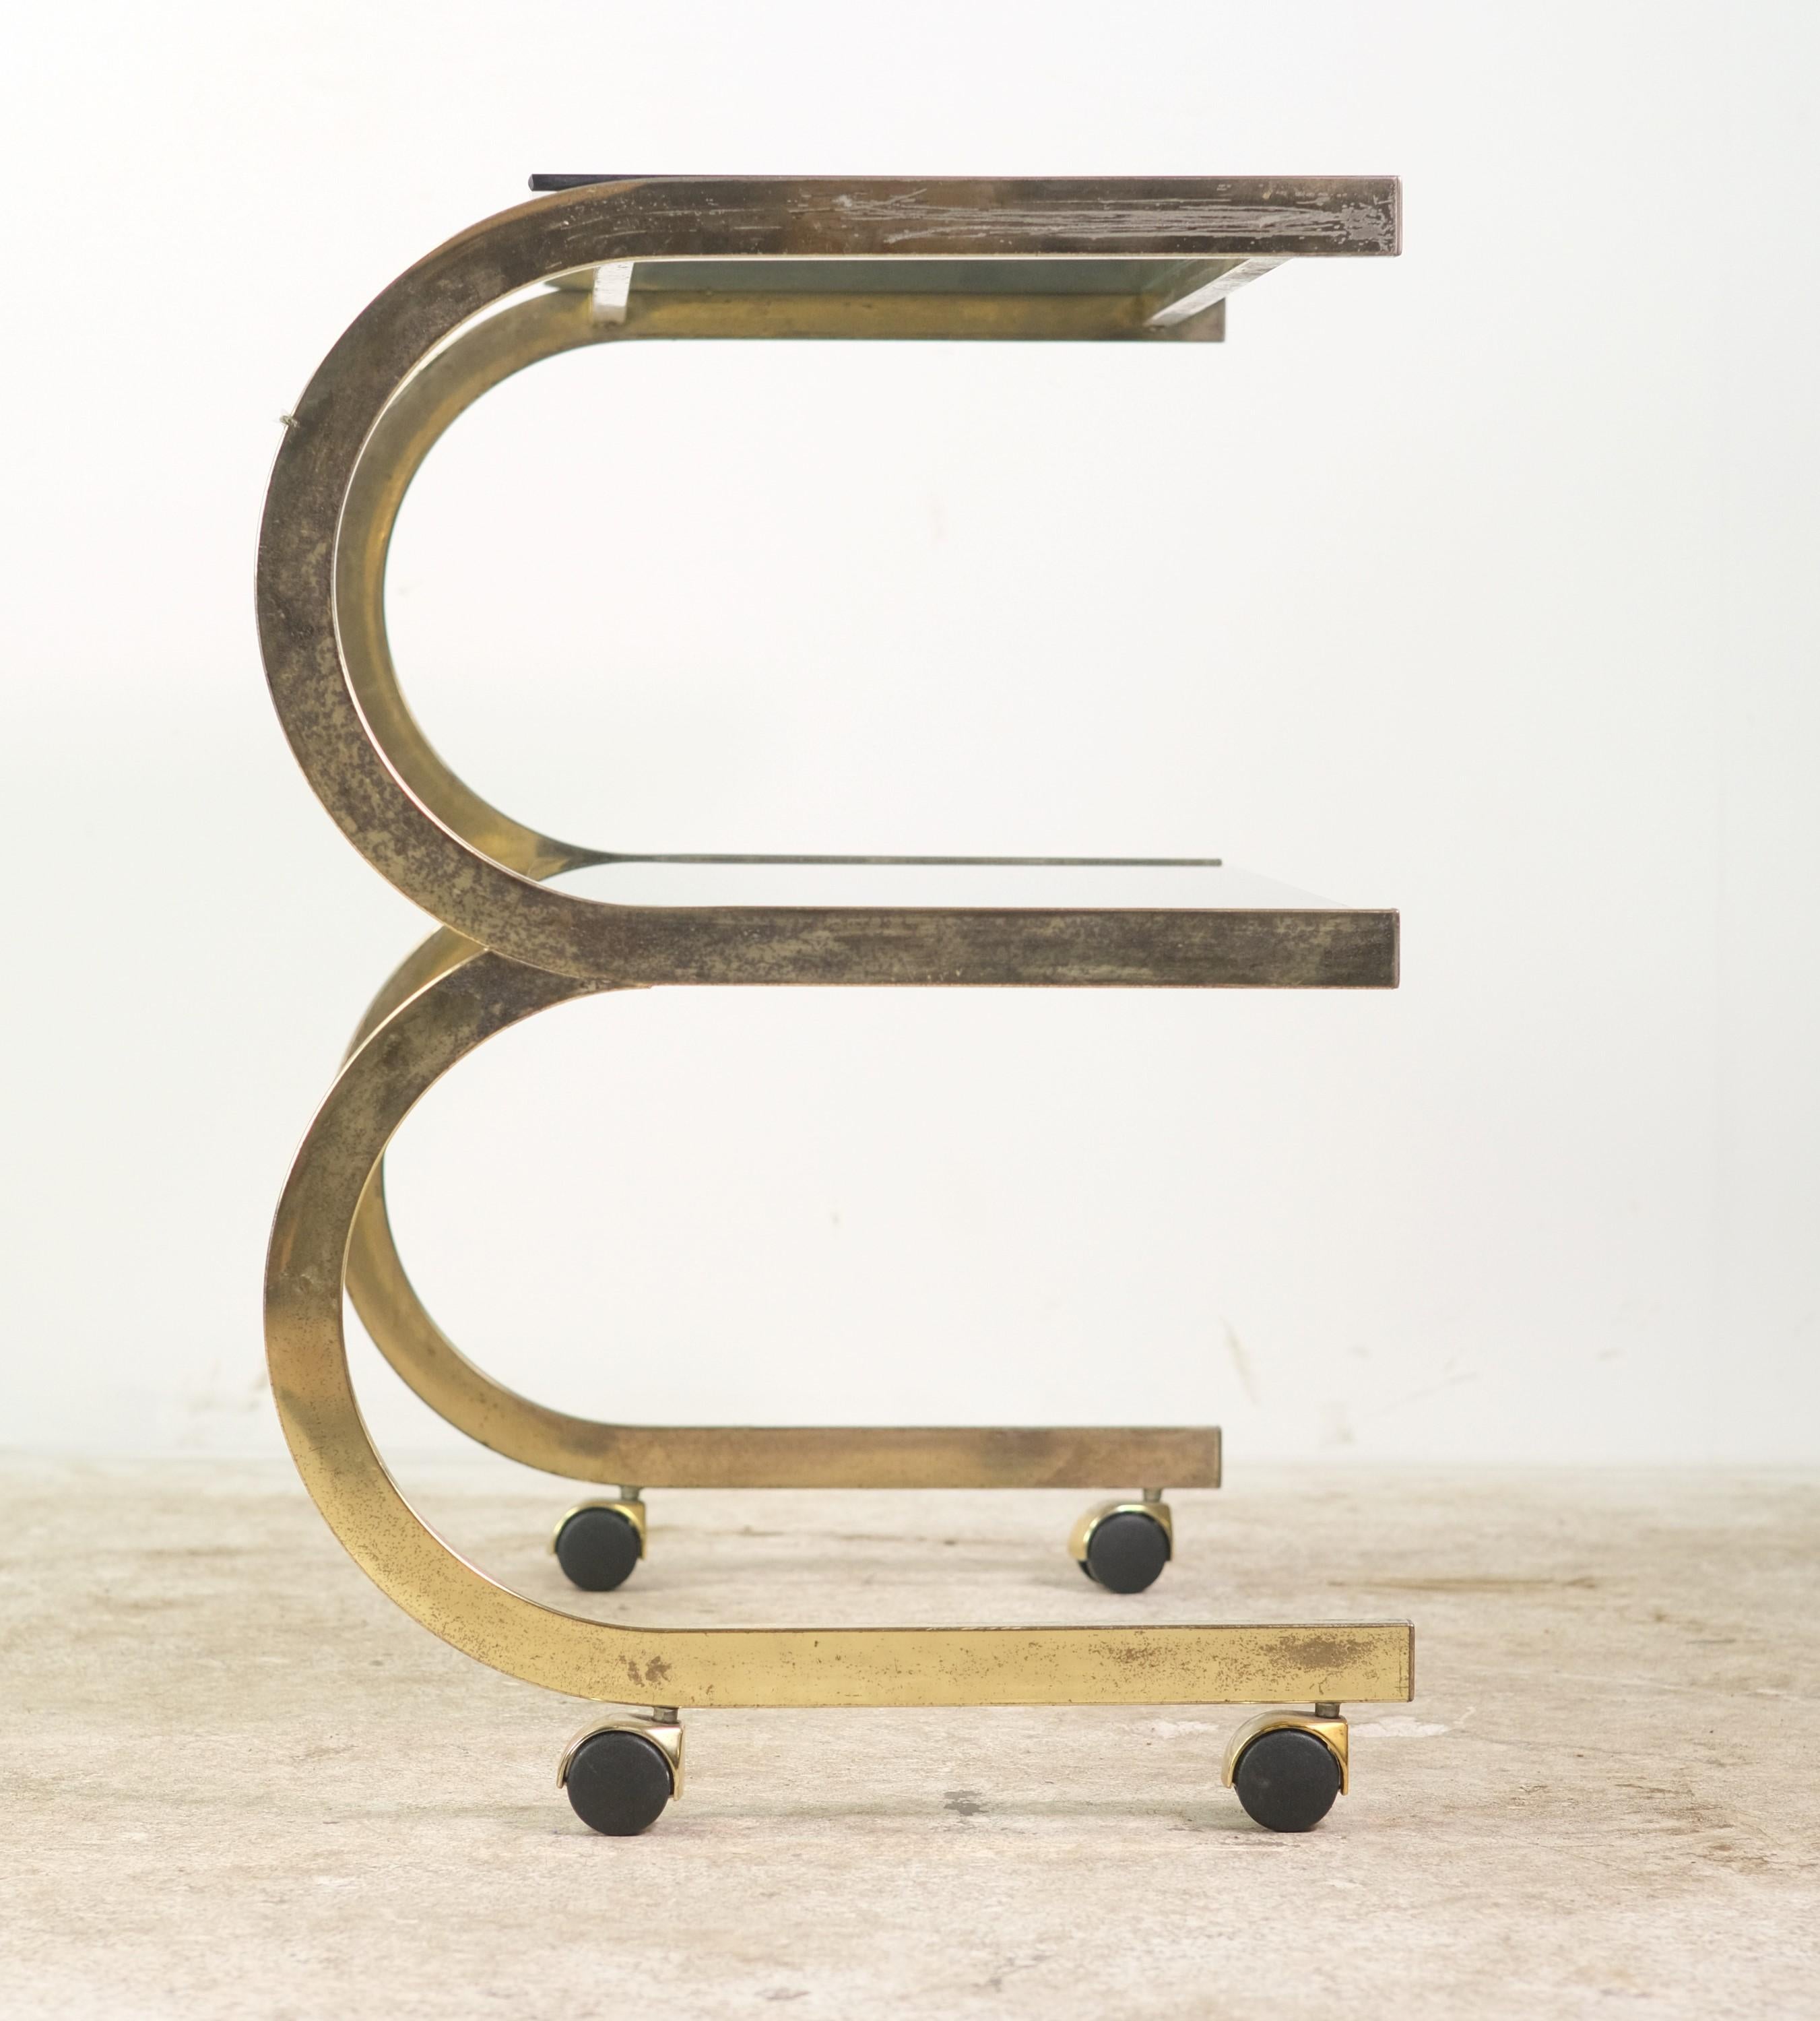 Italian Prandini 2-tier brass bar cart with tinted glass rectangular shelves. This Bauhaus inspired cart has a brass-plated steel frame with wheels. The frame has a looped design supporting the two glass shelves. 

